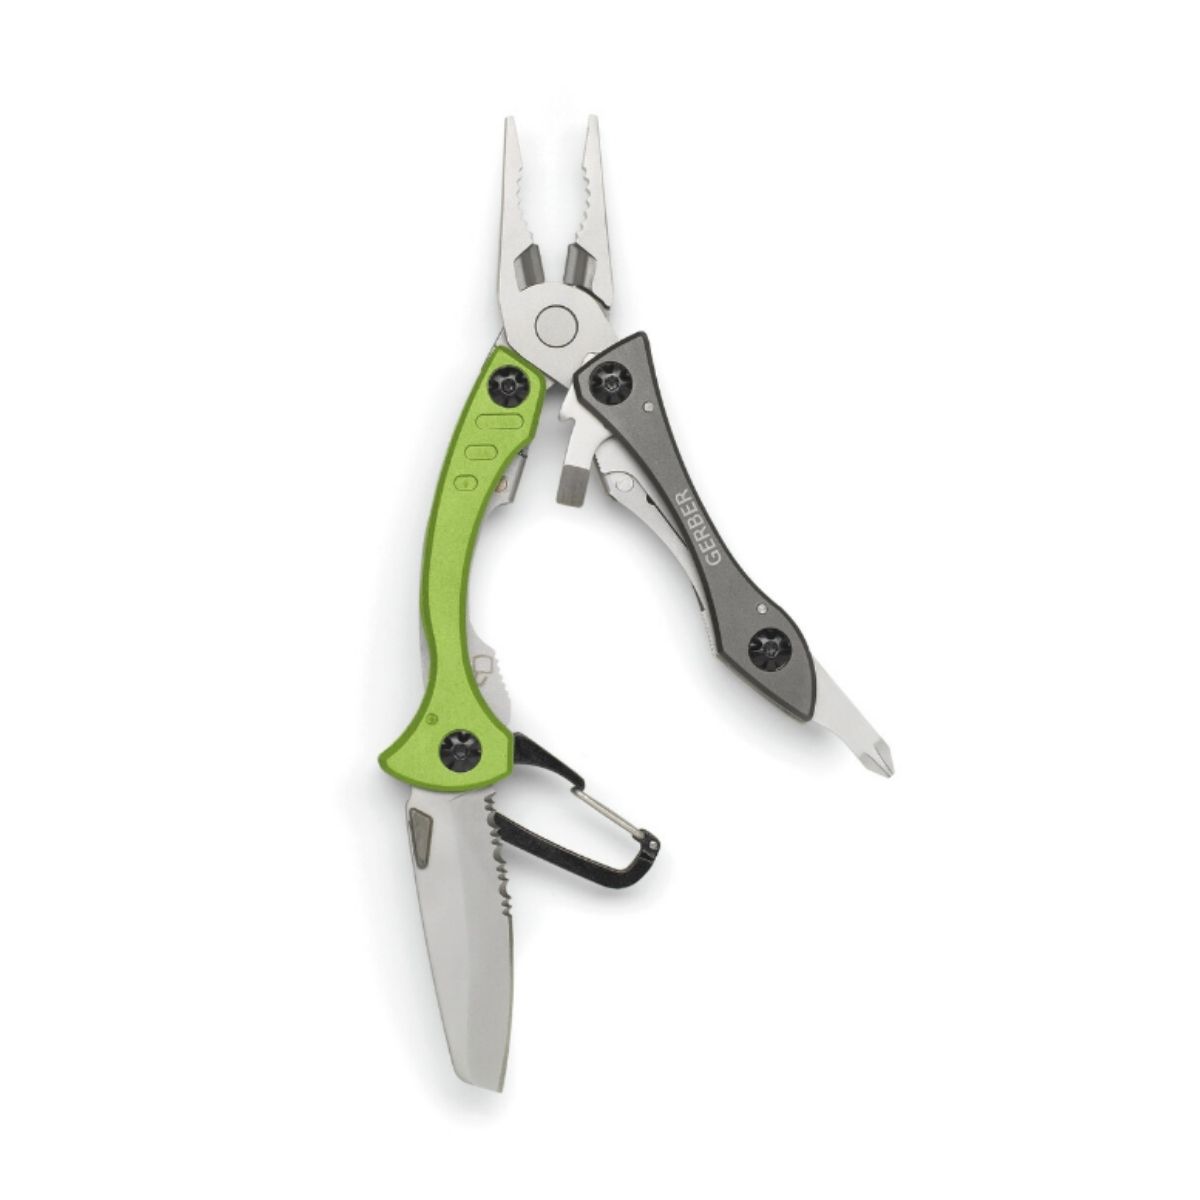 Bricege si unelte multifunctionale - Multitool EDC (everyday carry) GERBER, Crucial, hectarul.ro